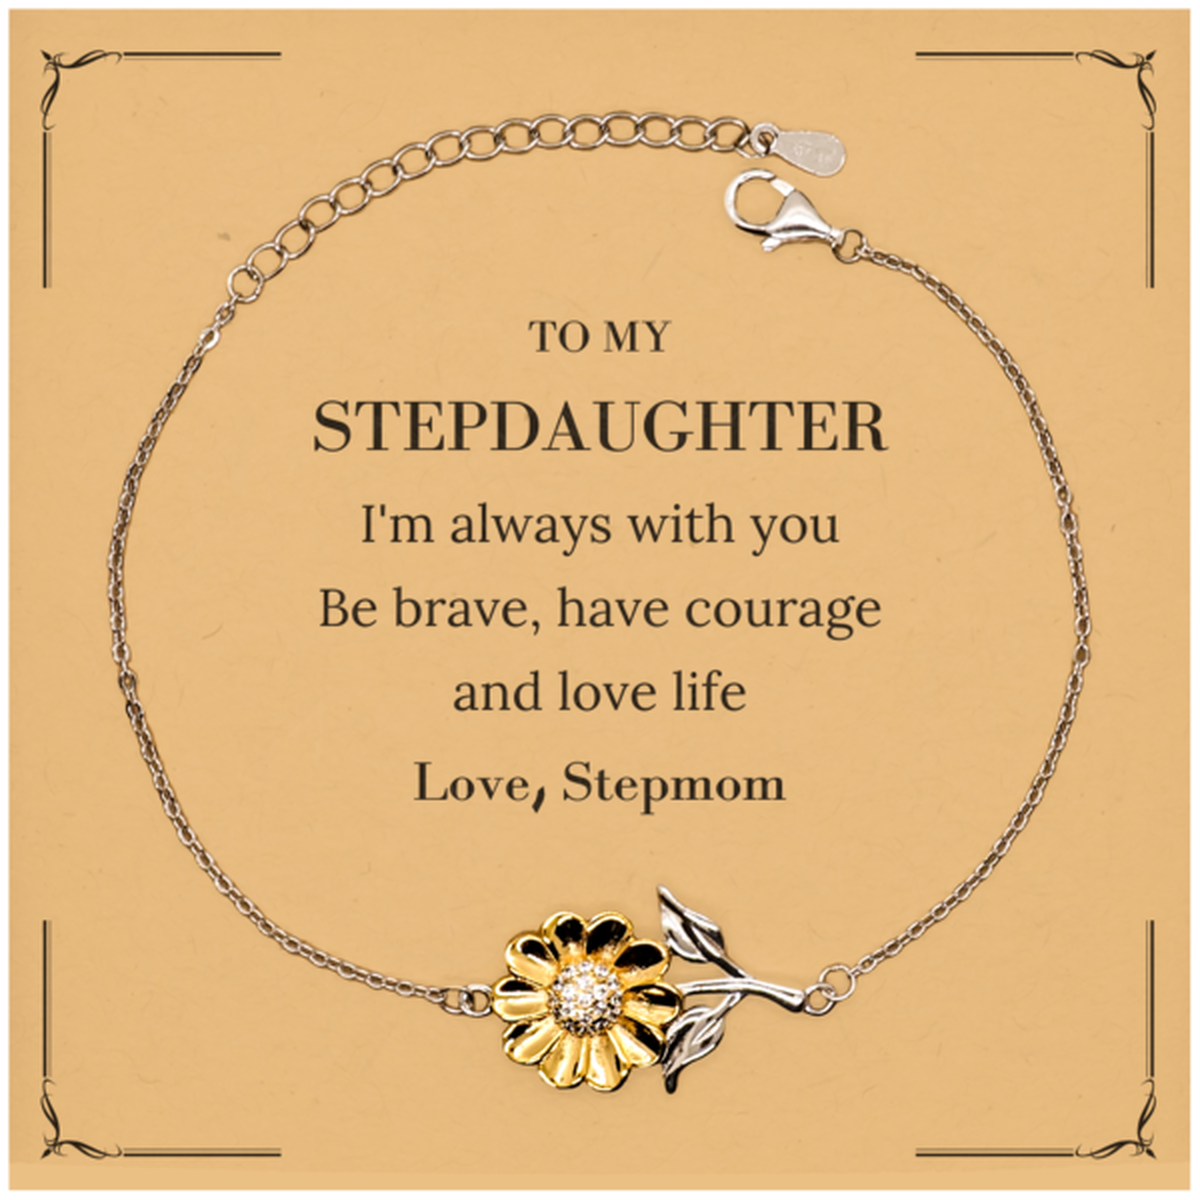 To My Stepdaughter Gifts from Stepmom, Unique Sunflower Bracelet Inspirational Christmas Birthday Graduation Gifts for Stepdaughter I'm always with you. Be brave, have courage and love life. Love, Stepmom